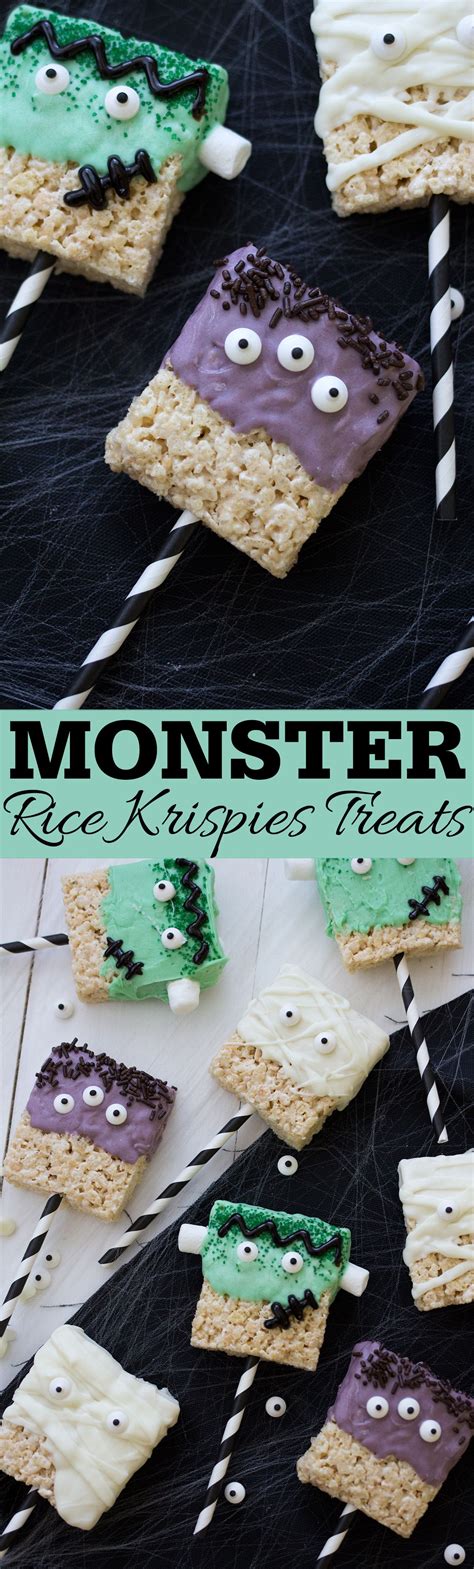 Turn Rice Krispies Treats Into Adorable Monsters For Halloween With